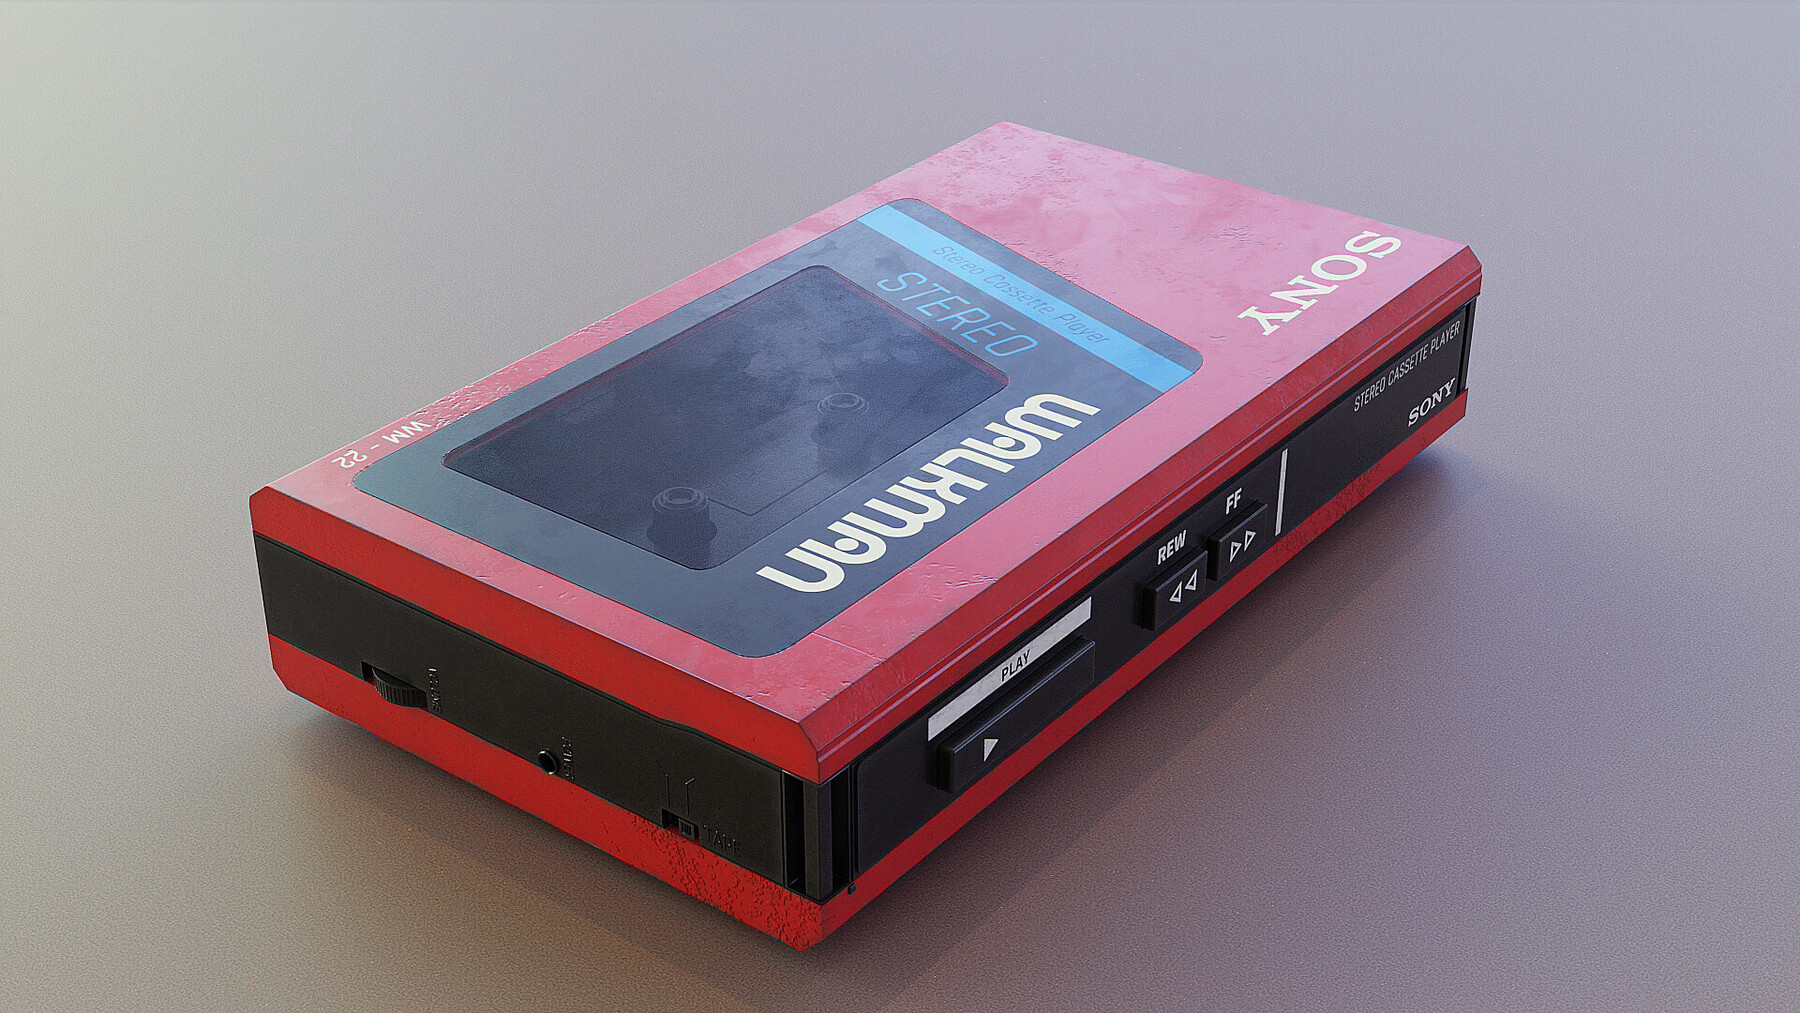 ArtStation - Creating a Sony Walkman in Blender and Substance Painter ...